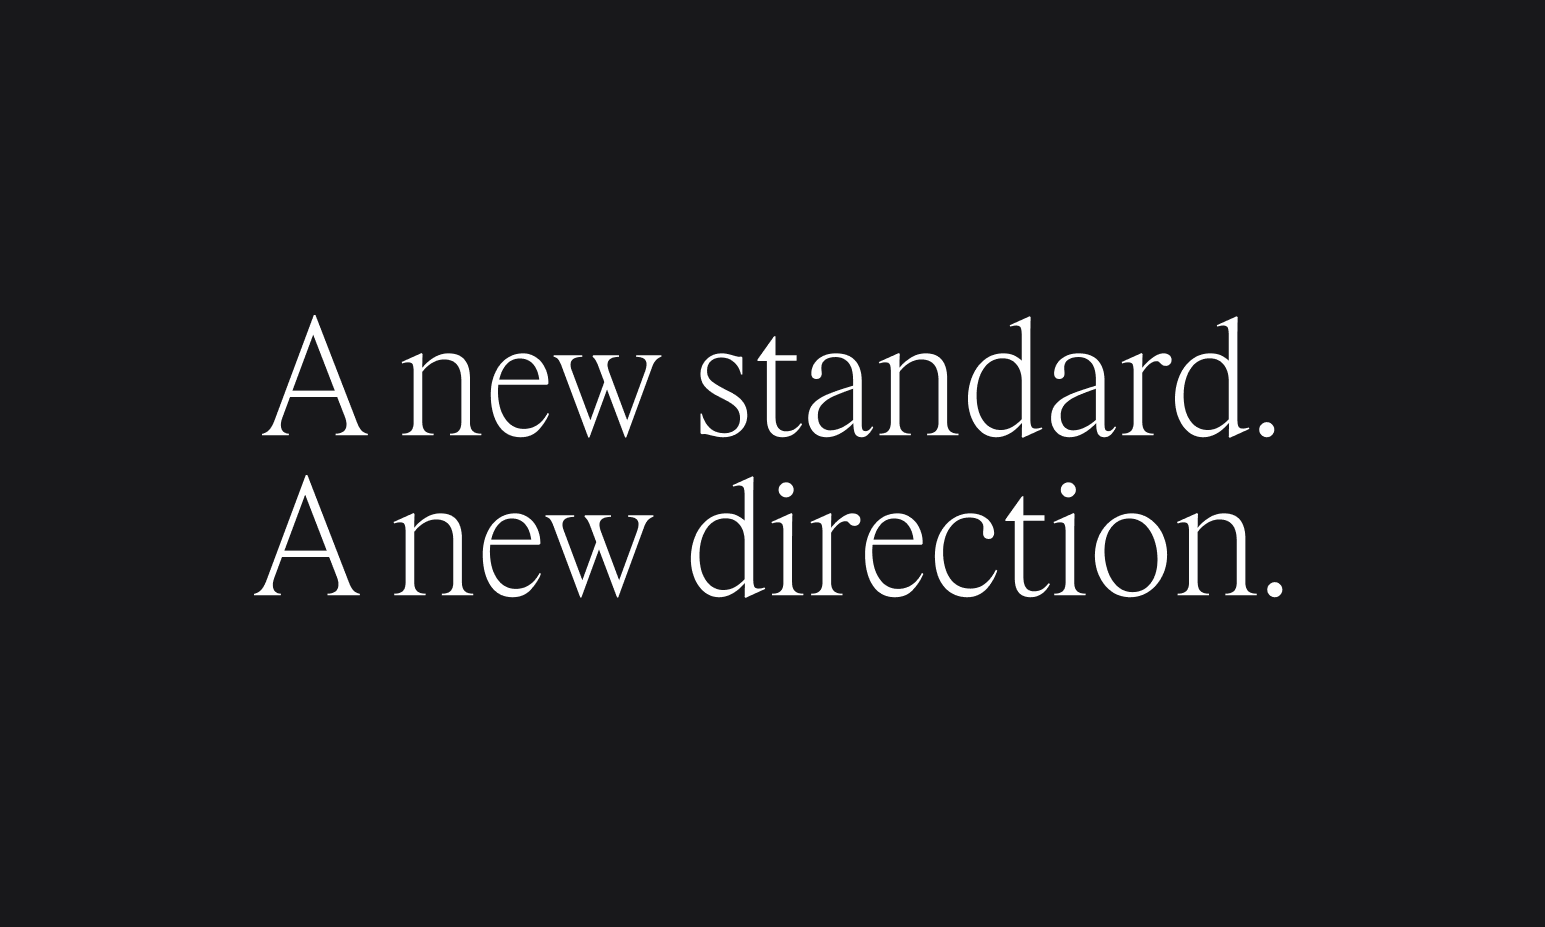 A new standard. A new direction.